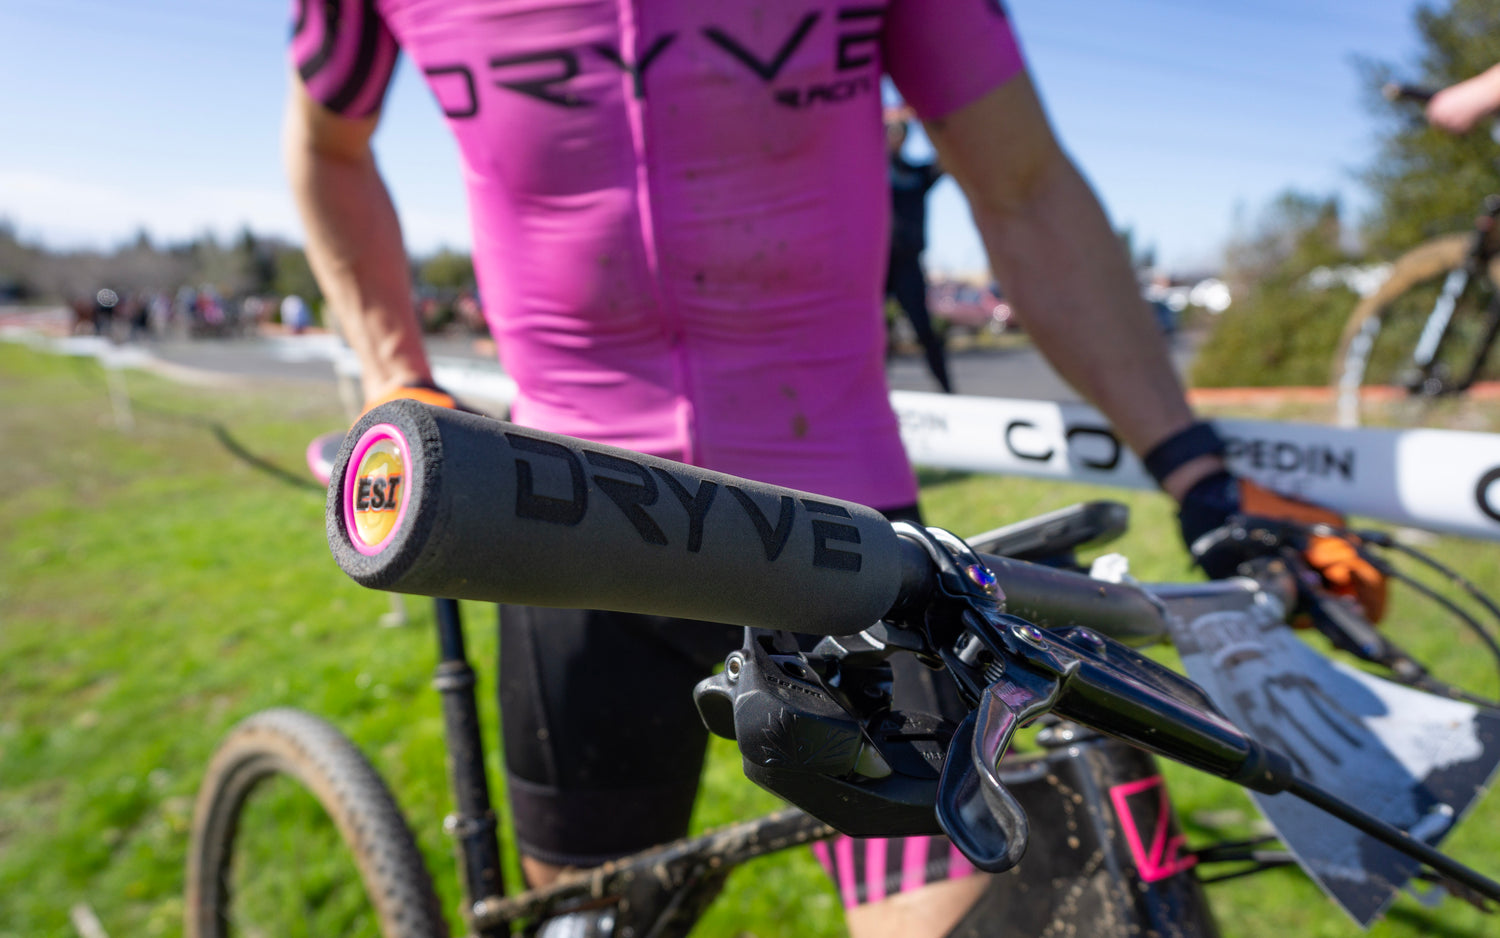 An engraved black esi grip is the focal point of the image. The engraved grip reads "Dryve" in the brands logo. Out of focus in the background is an athlete at a race dressed in a bright pink cycling kit from the team Dryve.